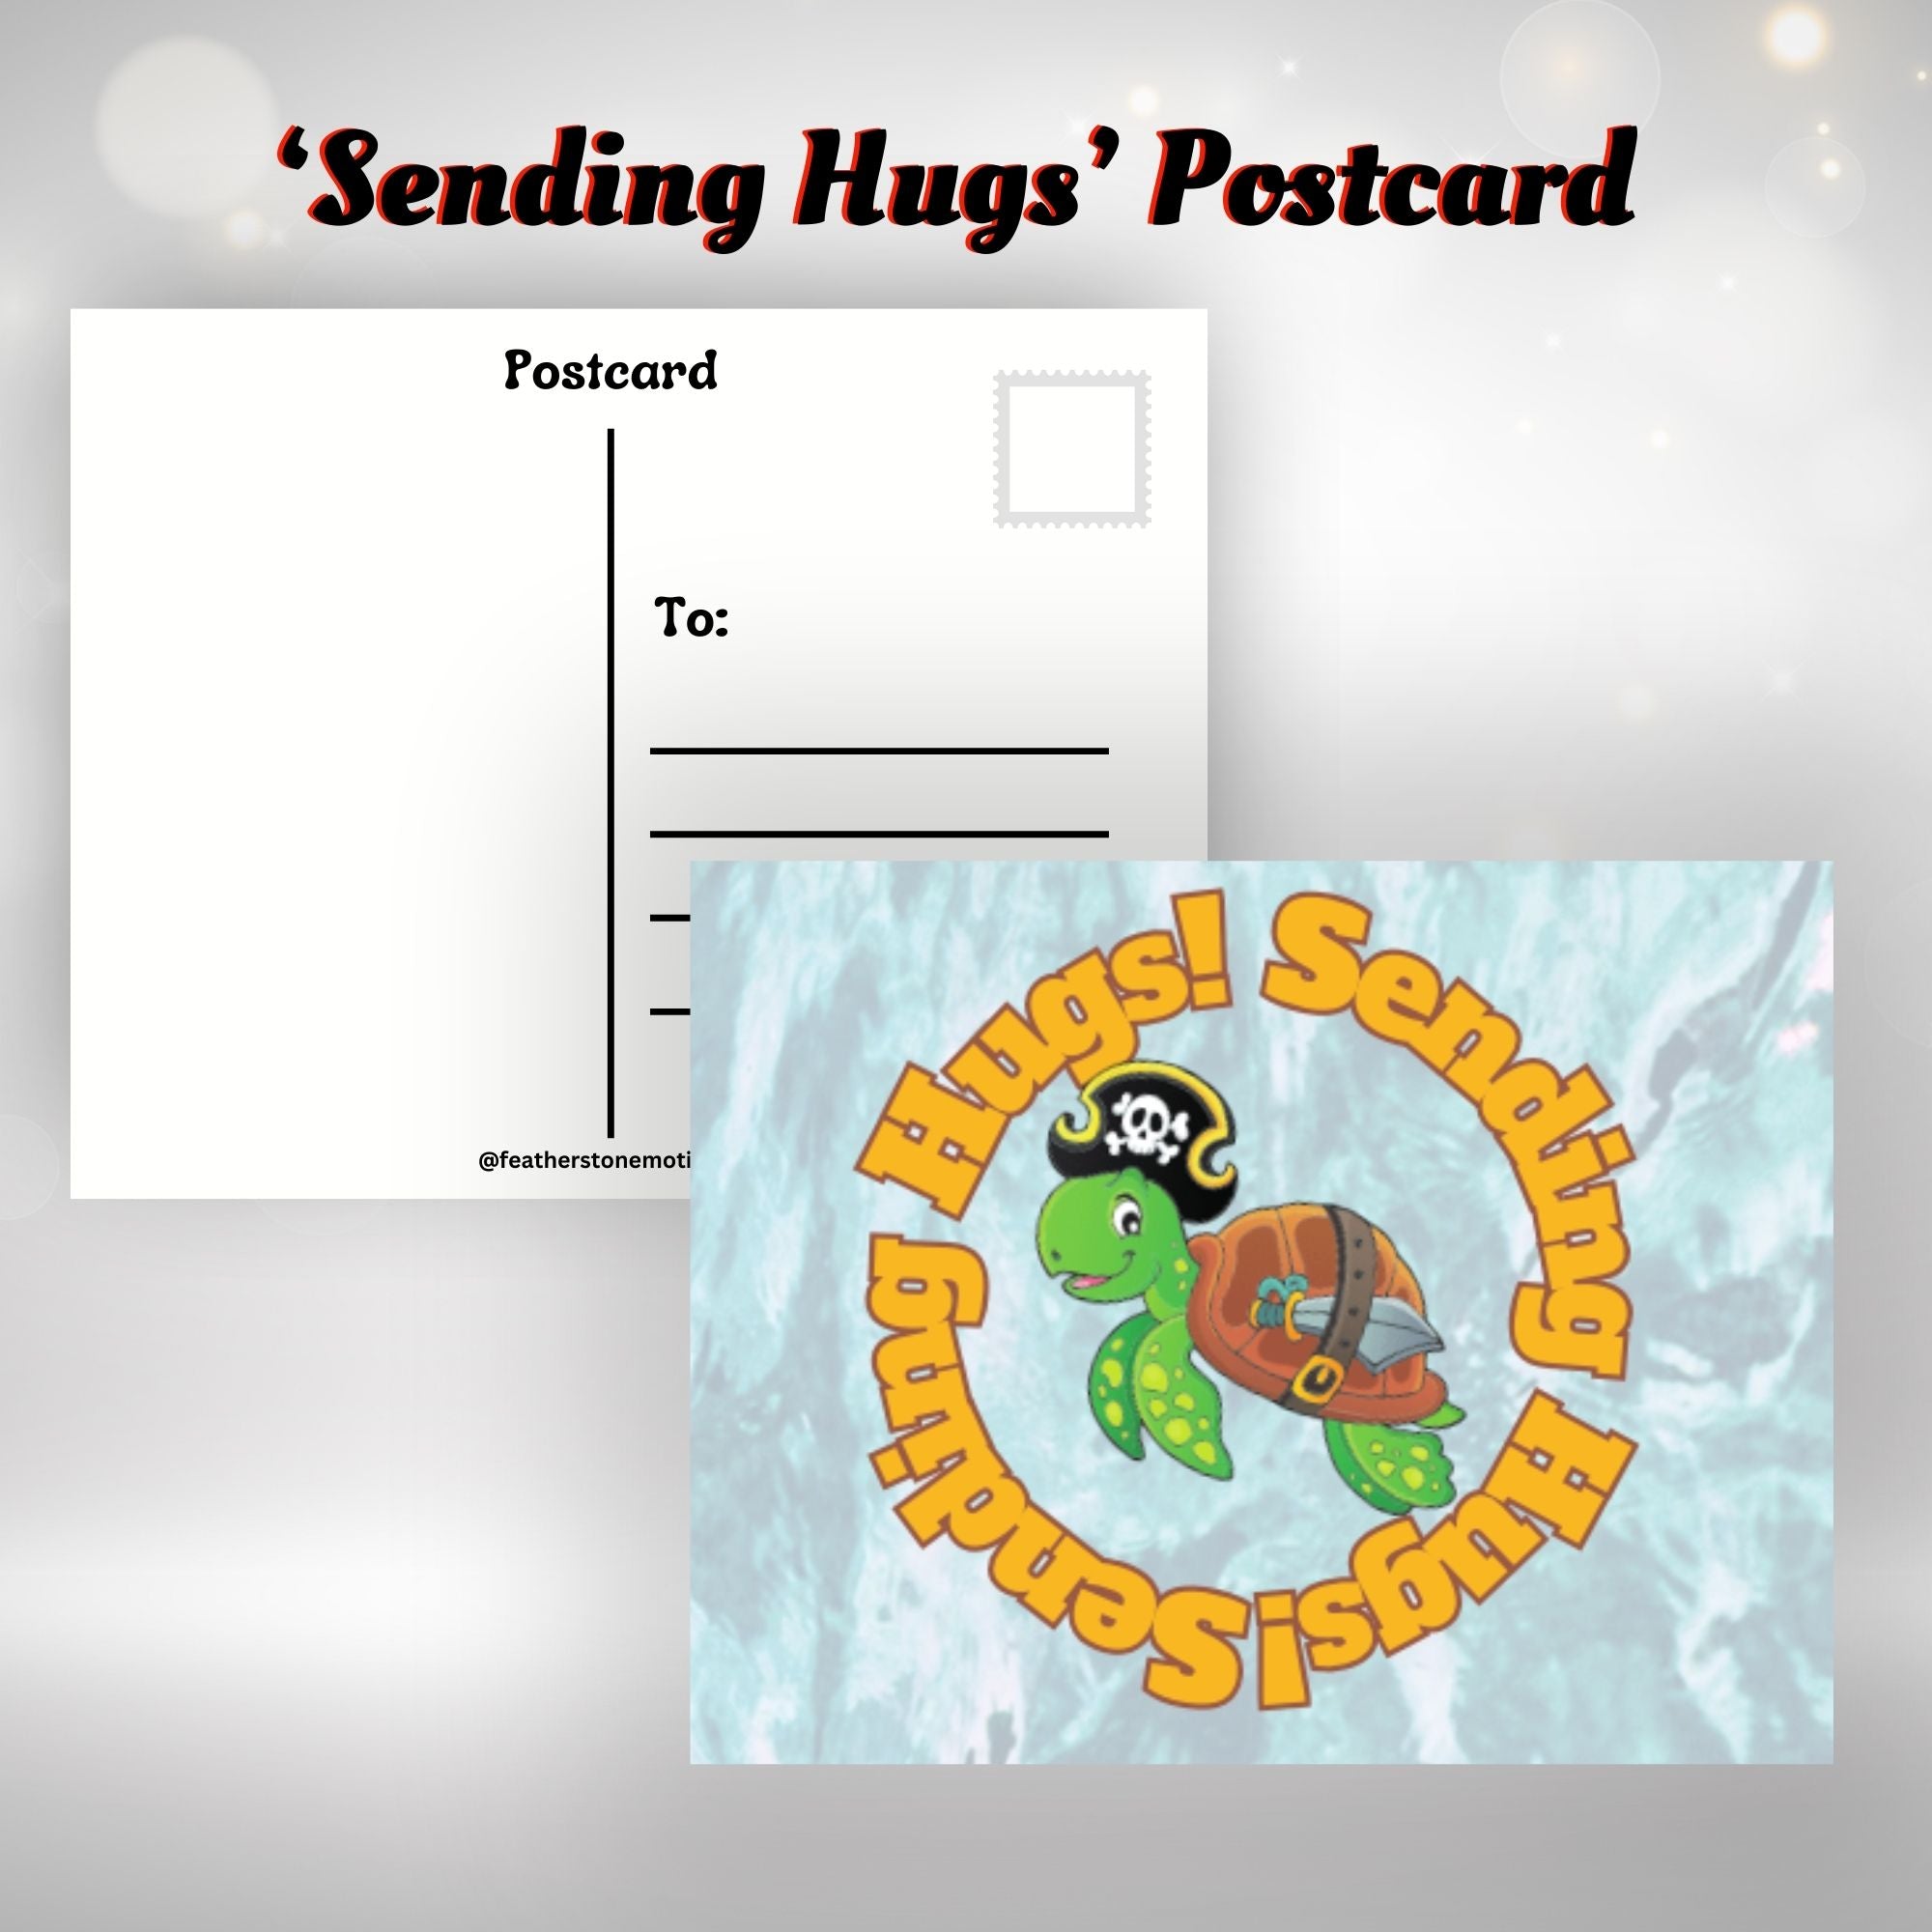 This image show the Sending Hugs! postcard with a pirate turtle in the center.